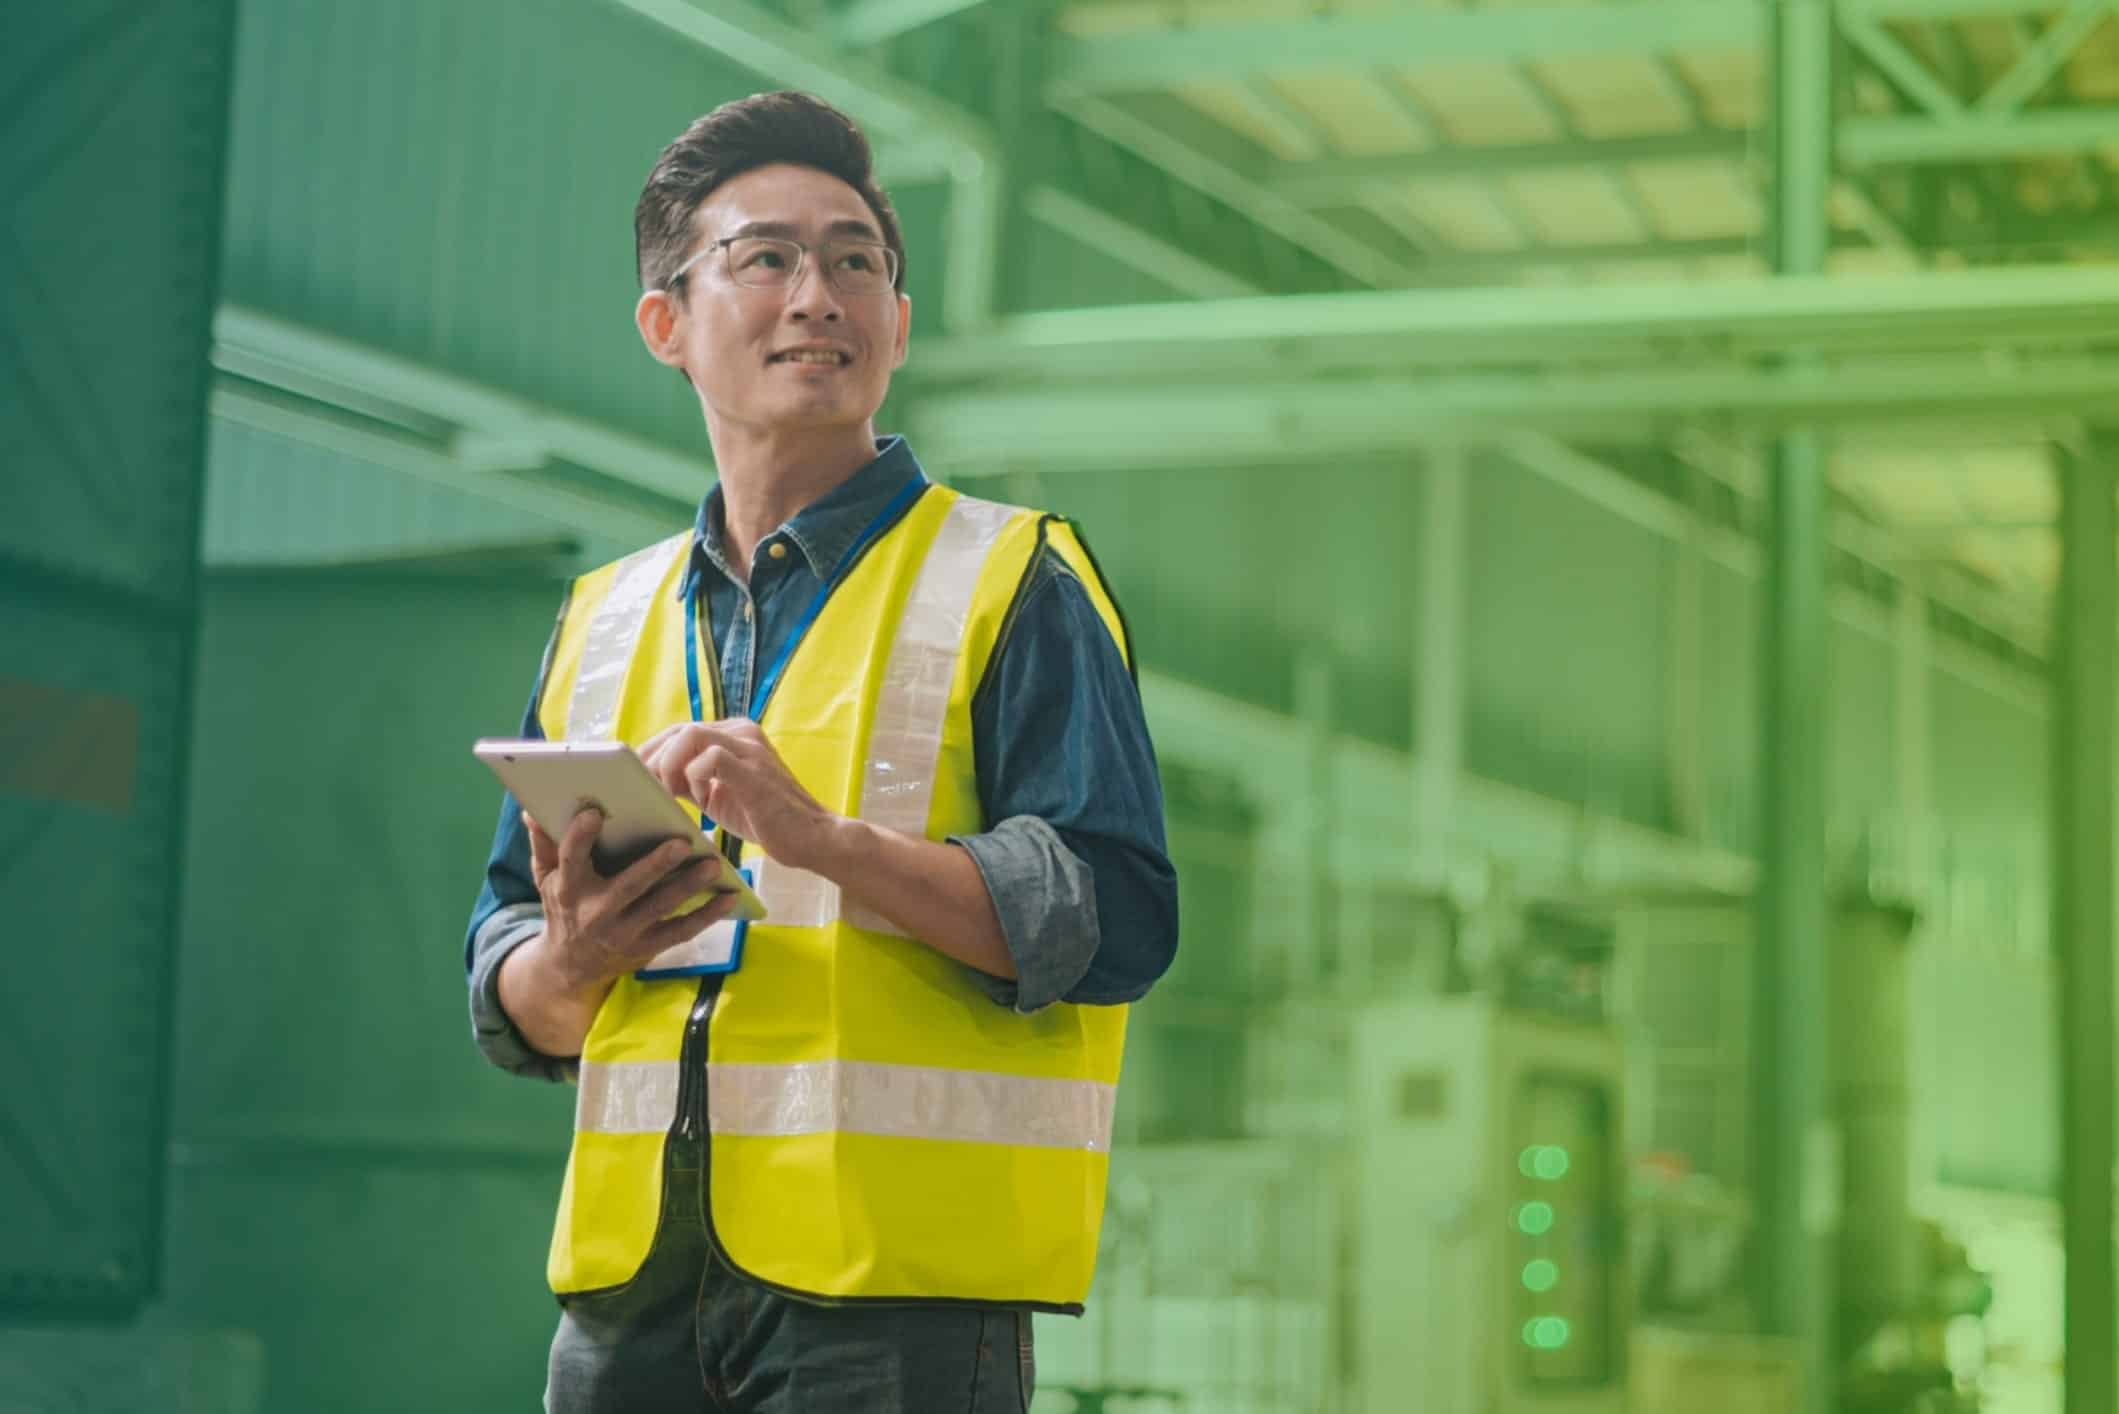 Why is safety important in the supply chain?